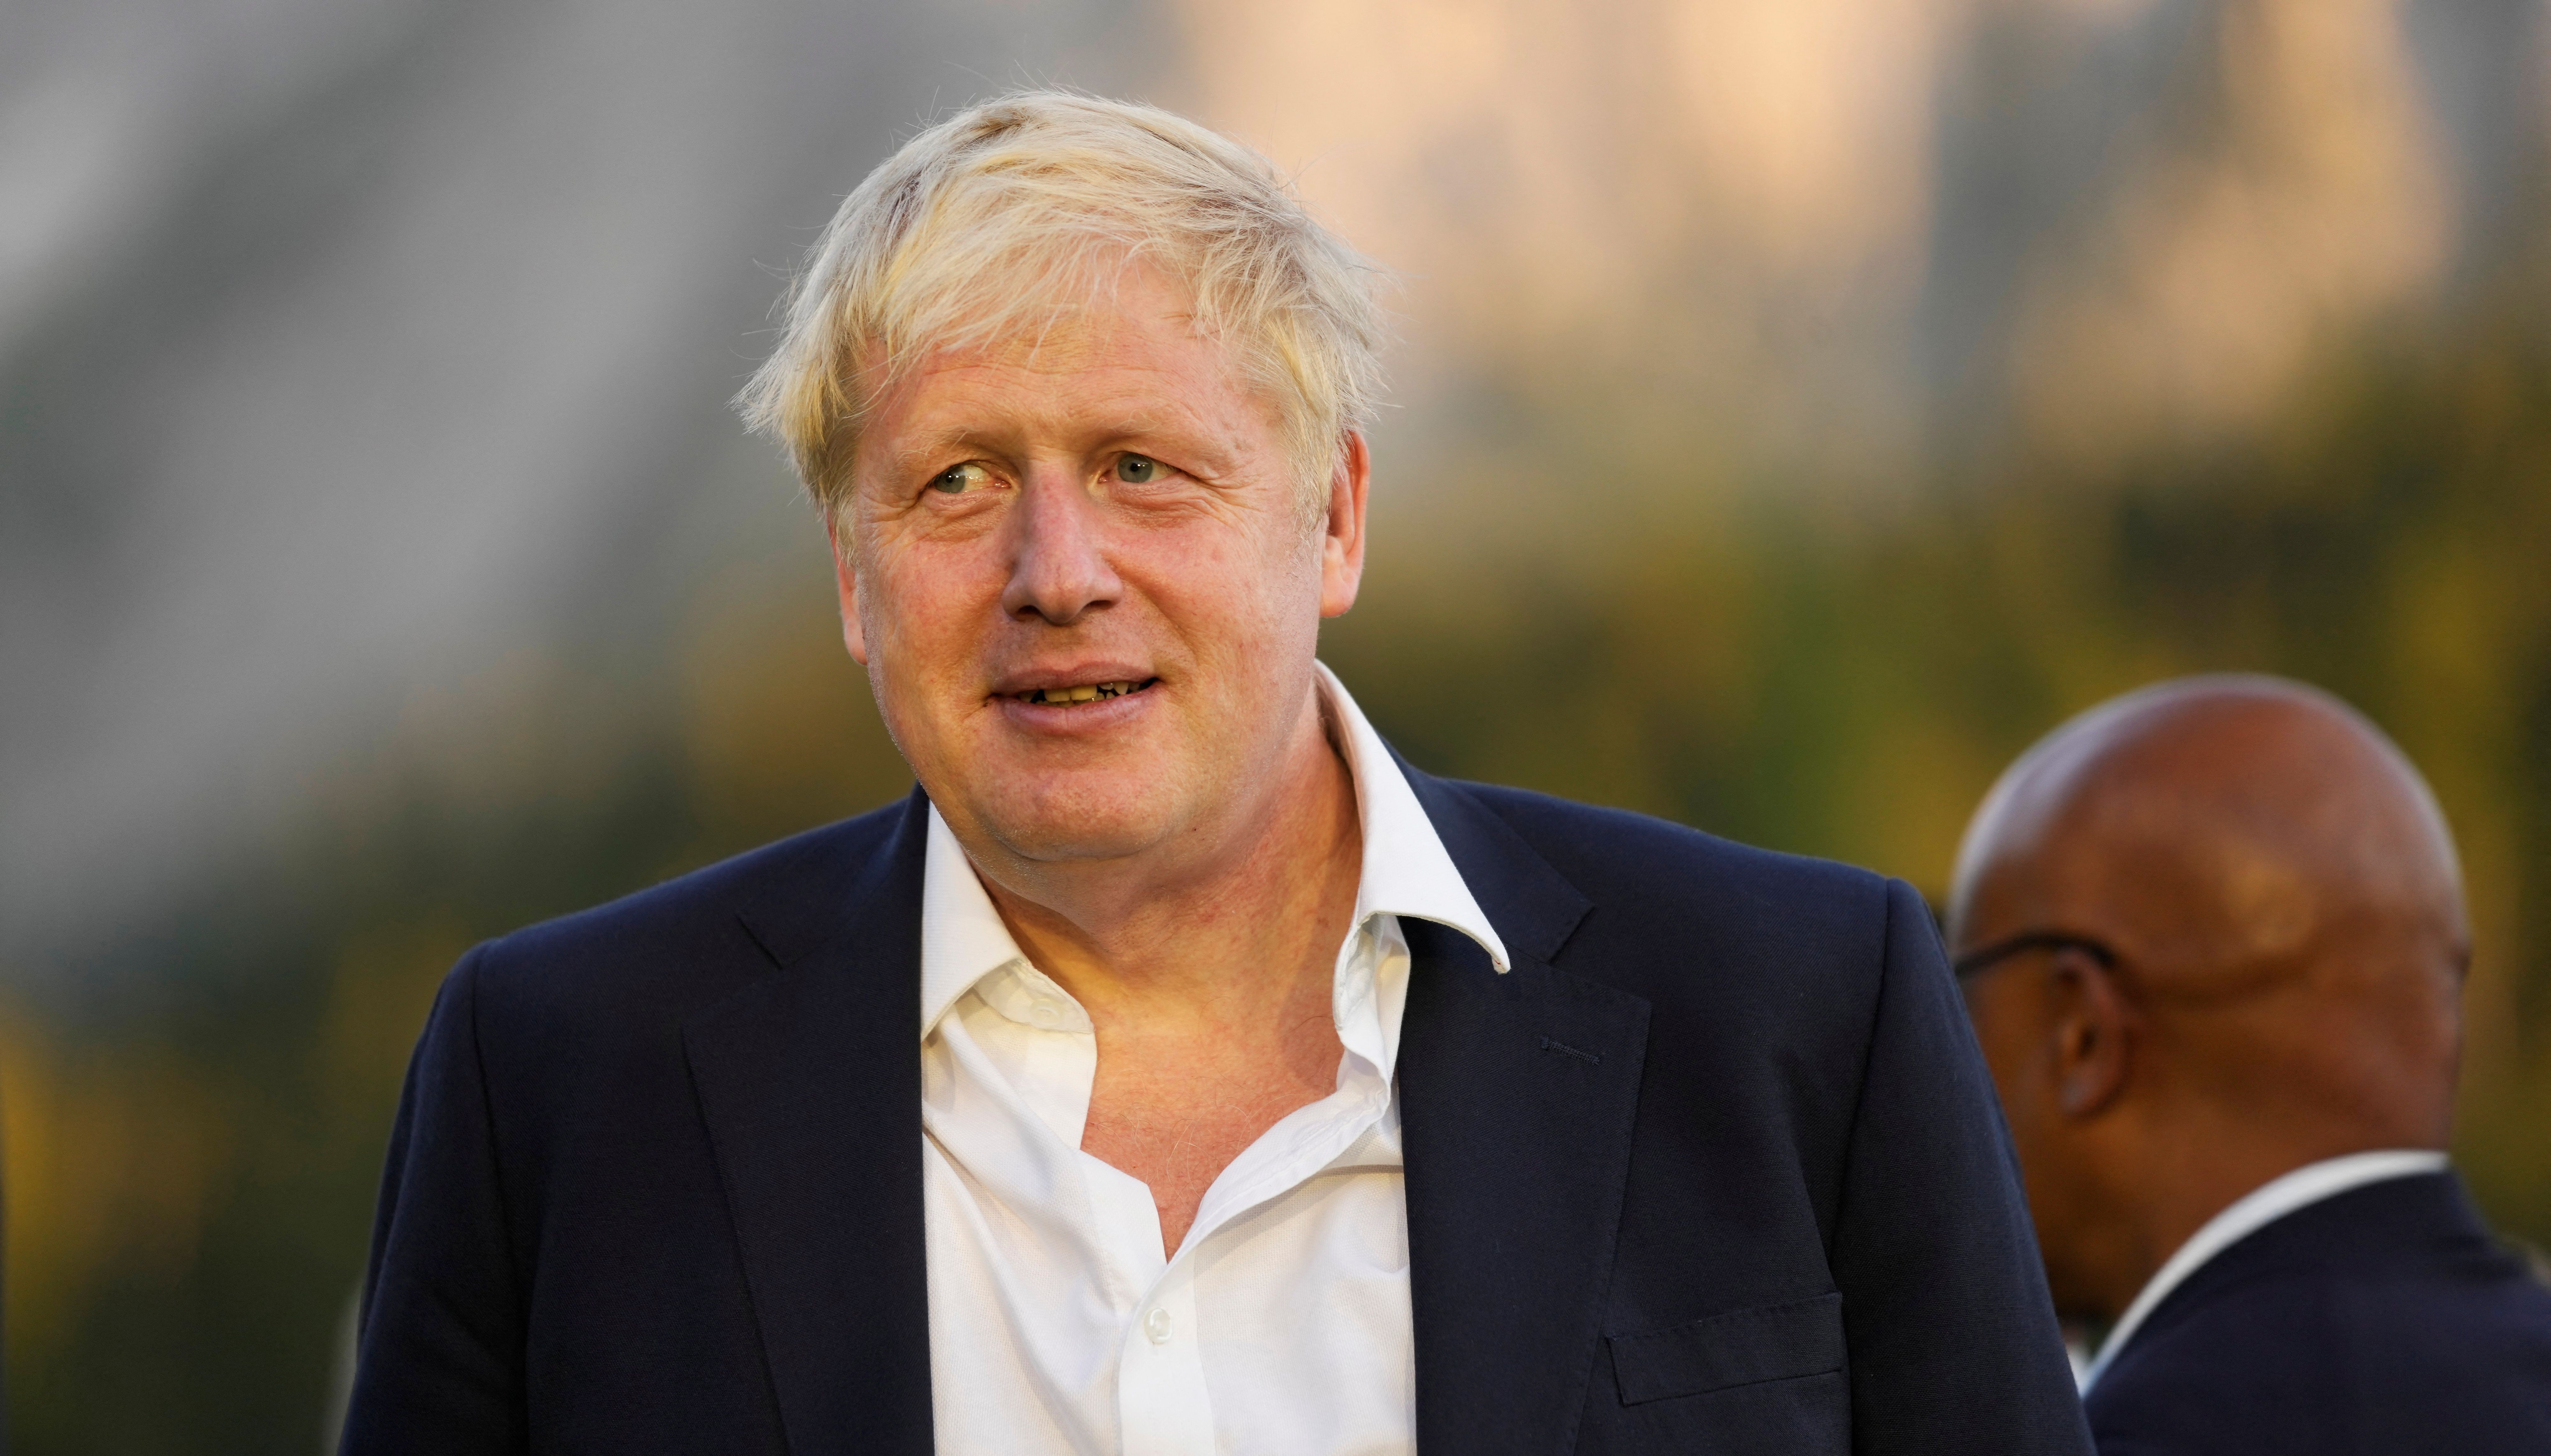 Prime Minister Boris Johnson spoke to reporters at the G7 summit in Germany